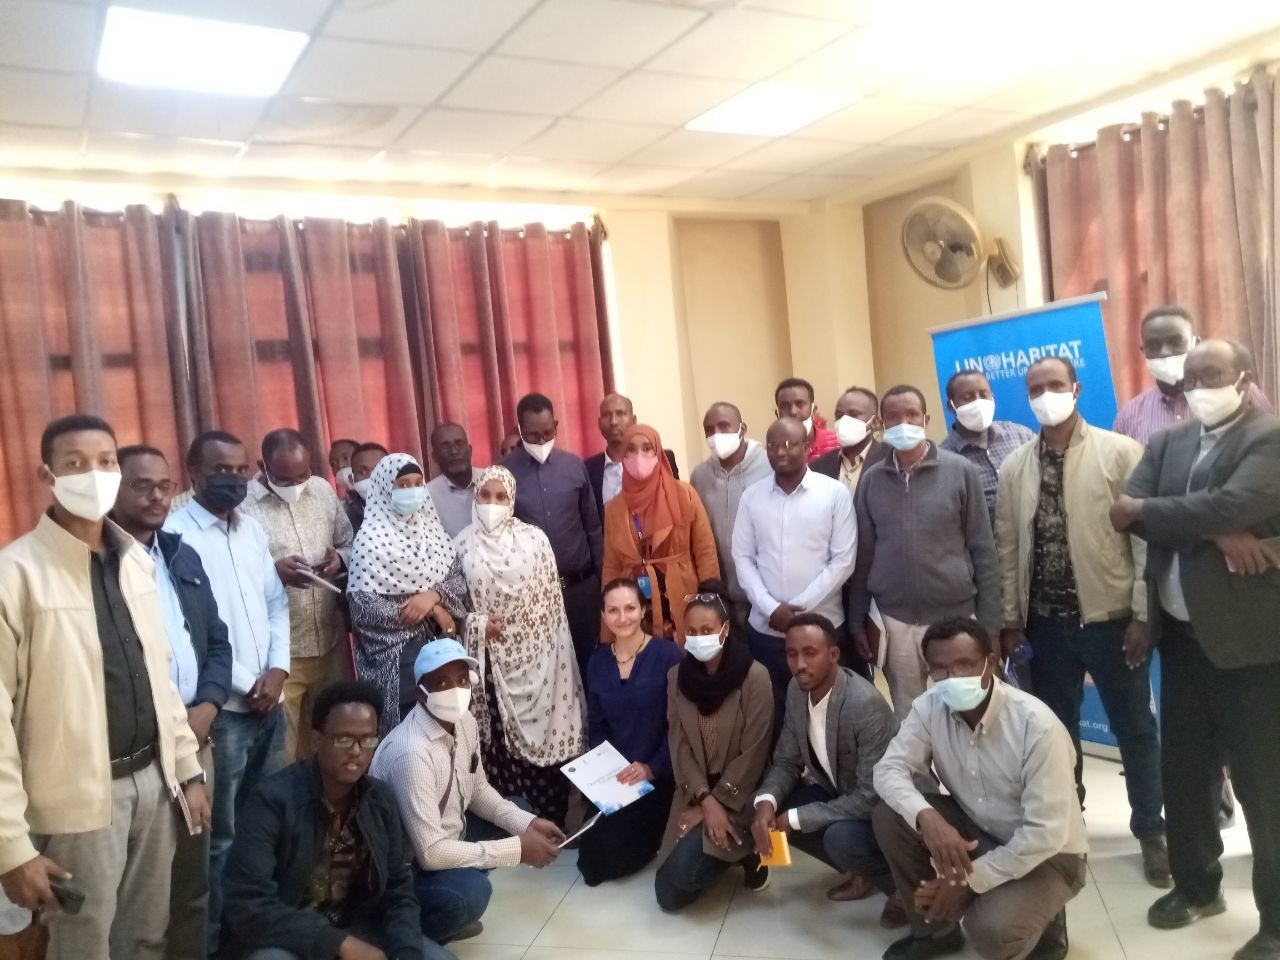 UN-Habitat partner with sister agencies to support durable solutions for IDPs in Somali Region, Ethiopia